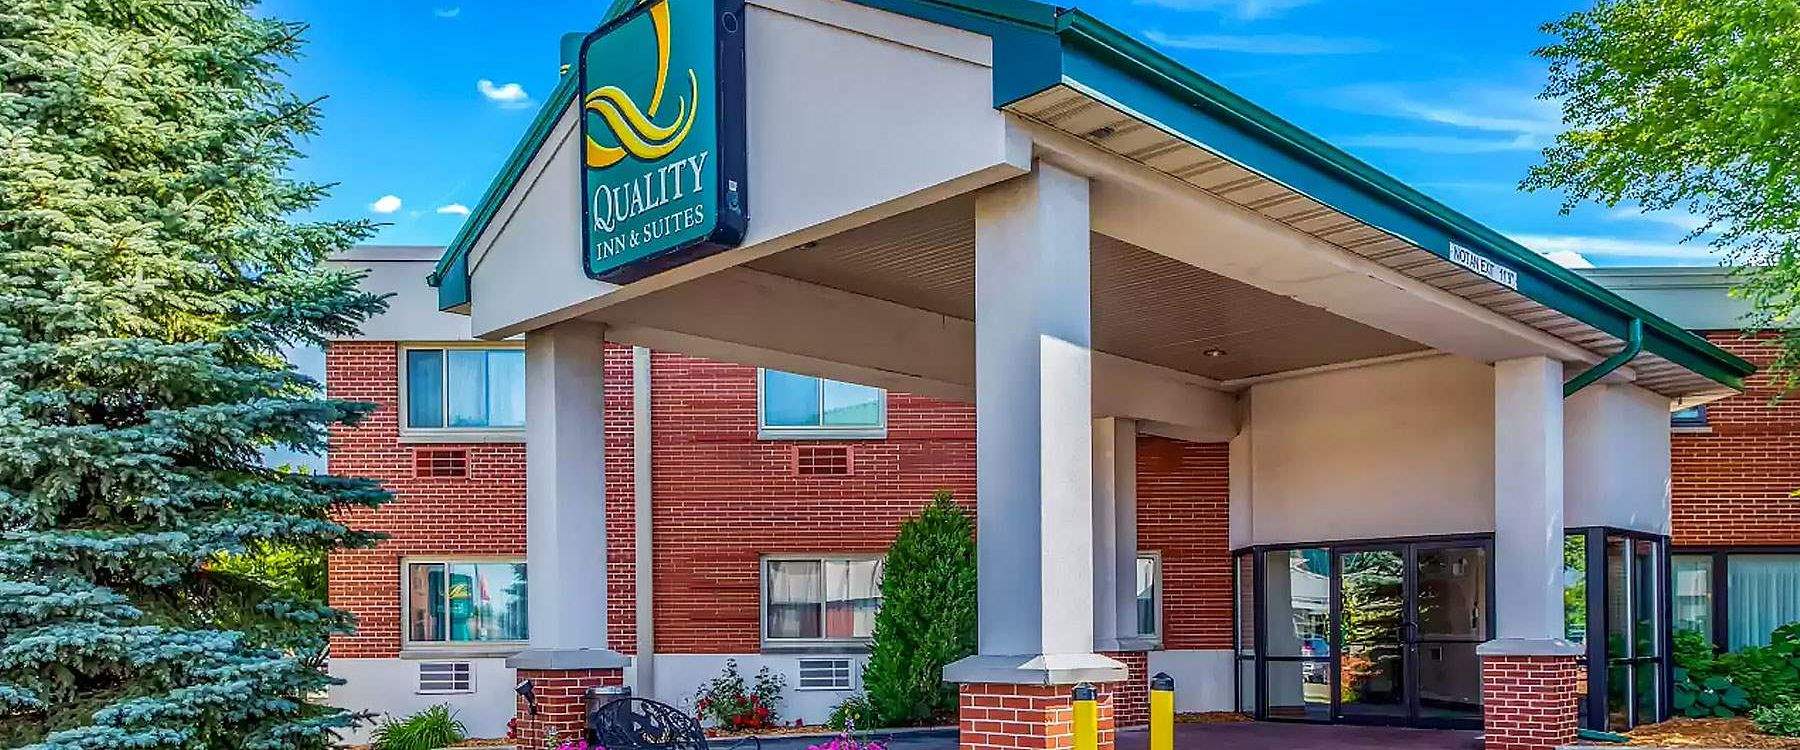 Quality Inn & Suites Downtown at Green Bay